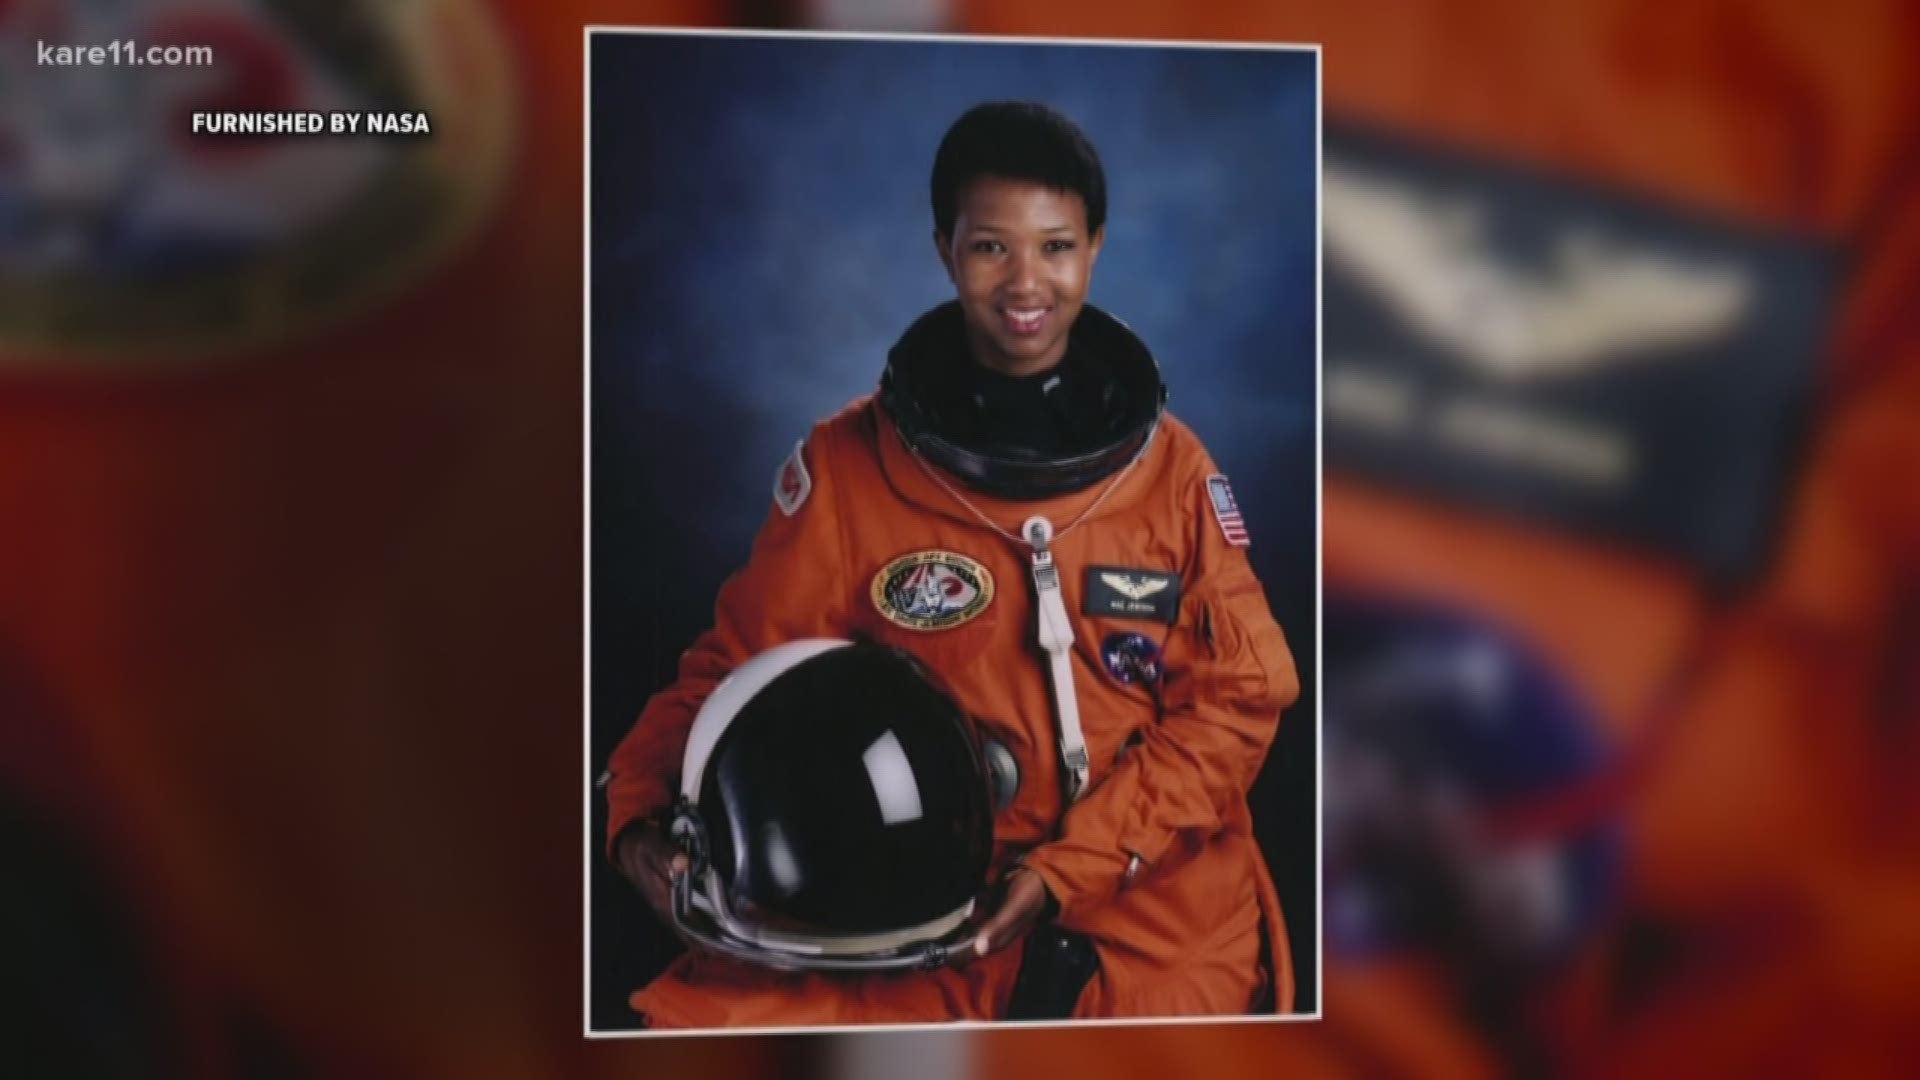 1 on 1 with Mae Jemison, the first African American woman in space